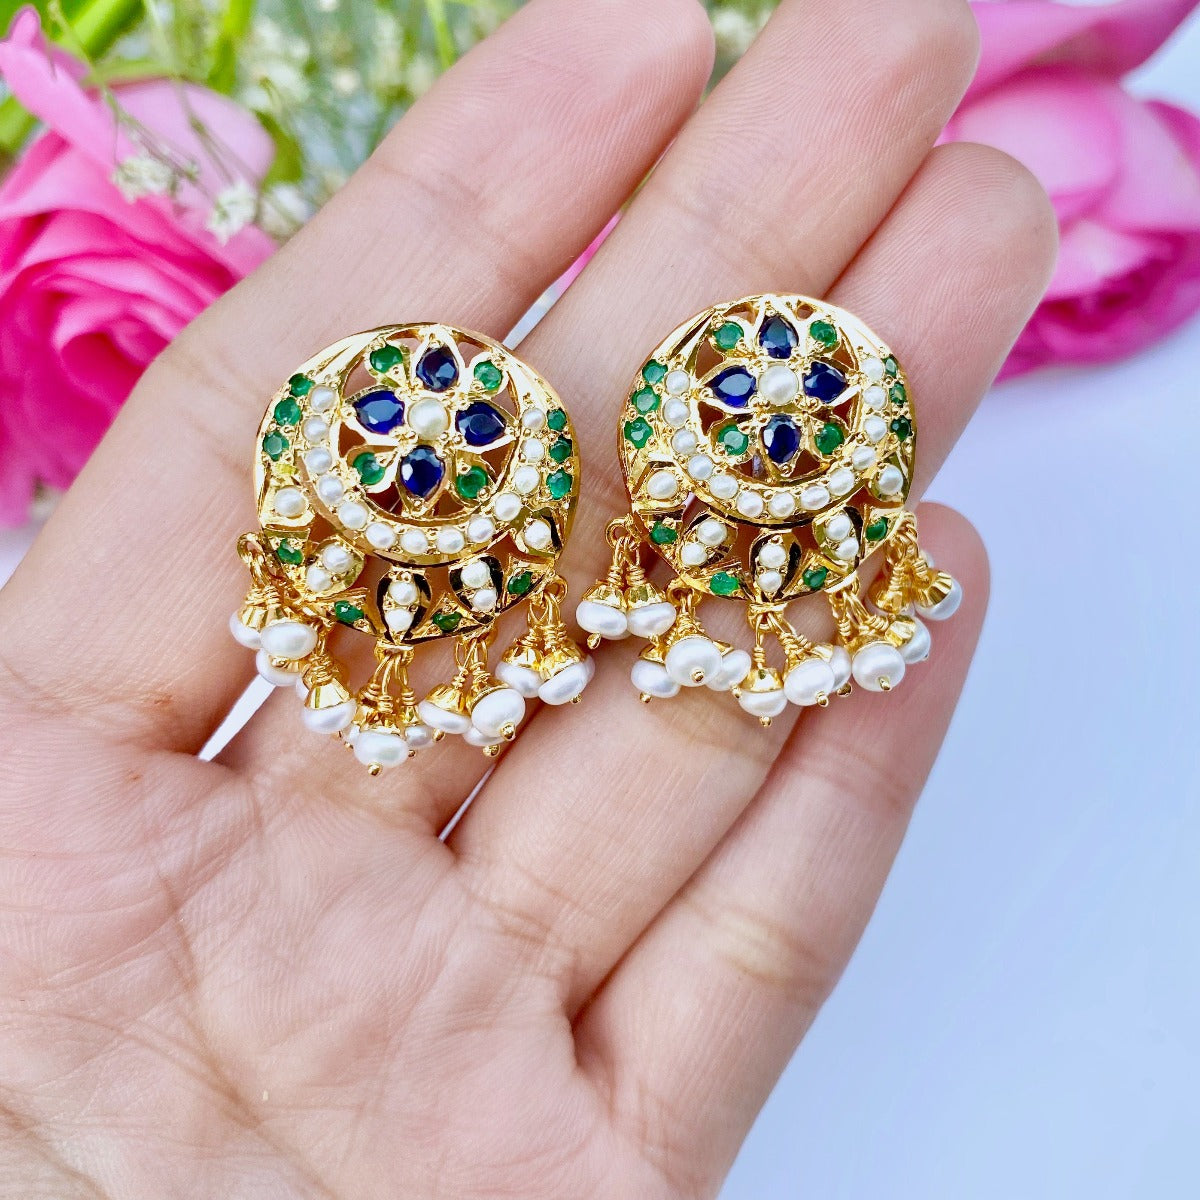 Bollywood round tops earrings